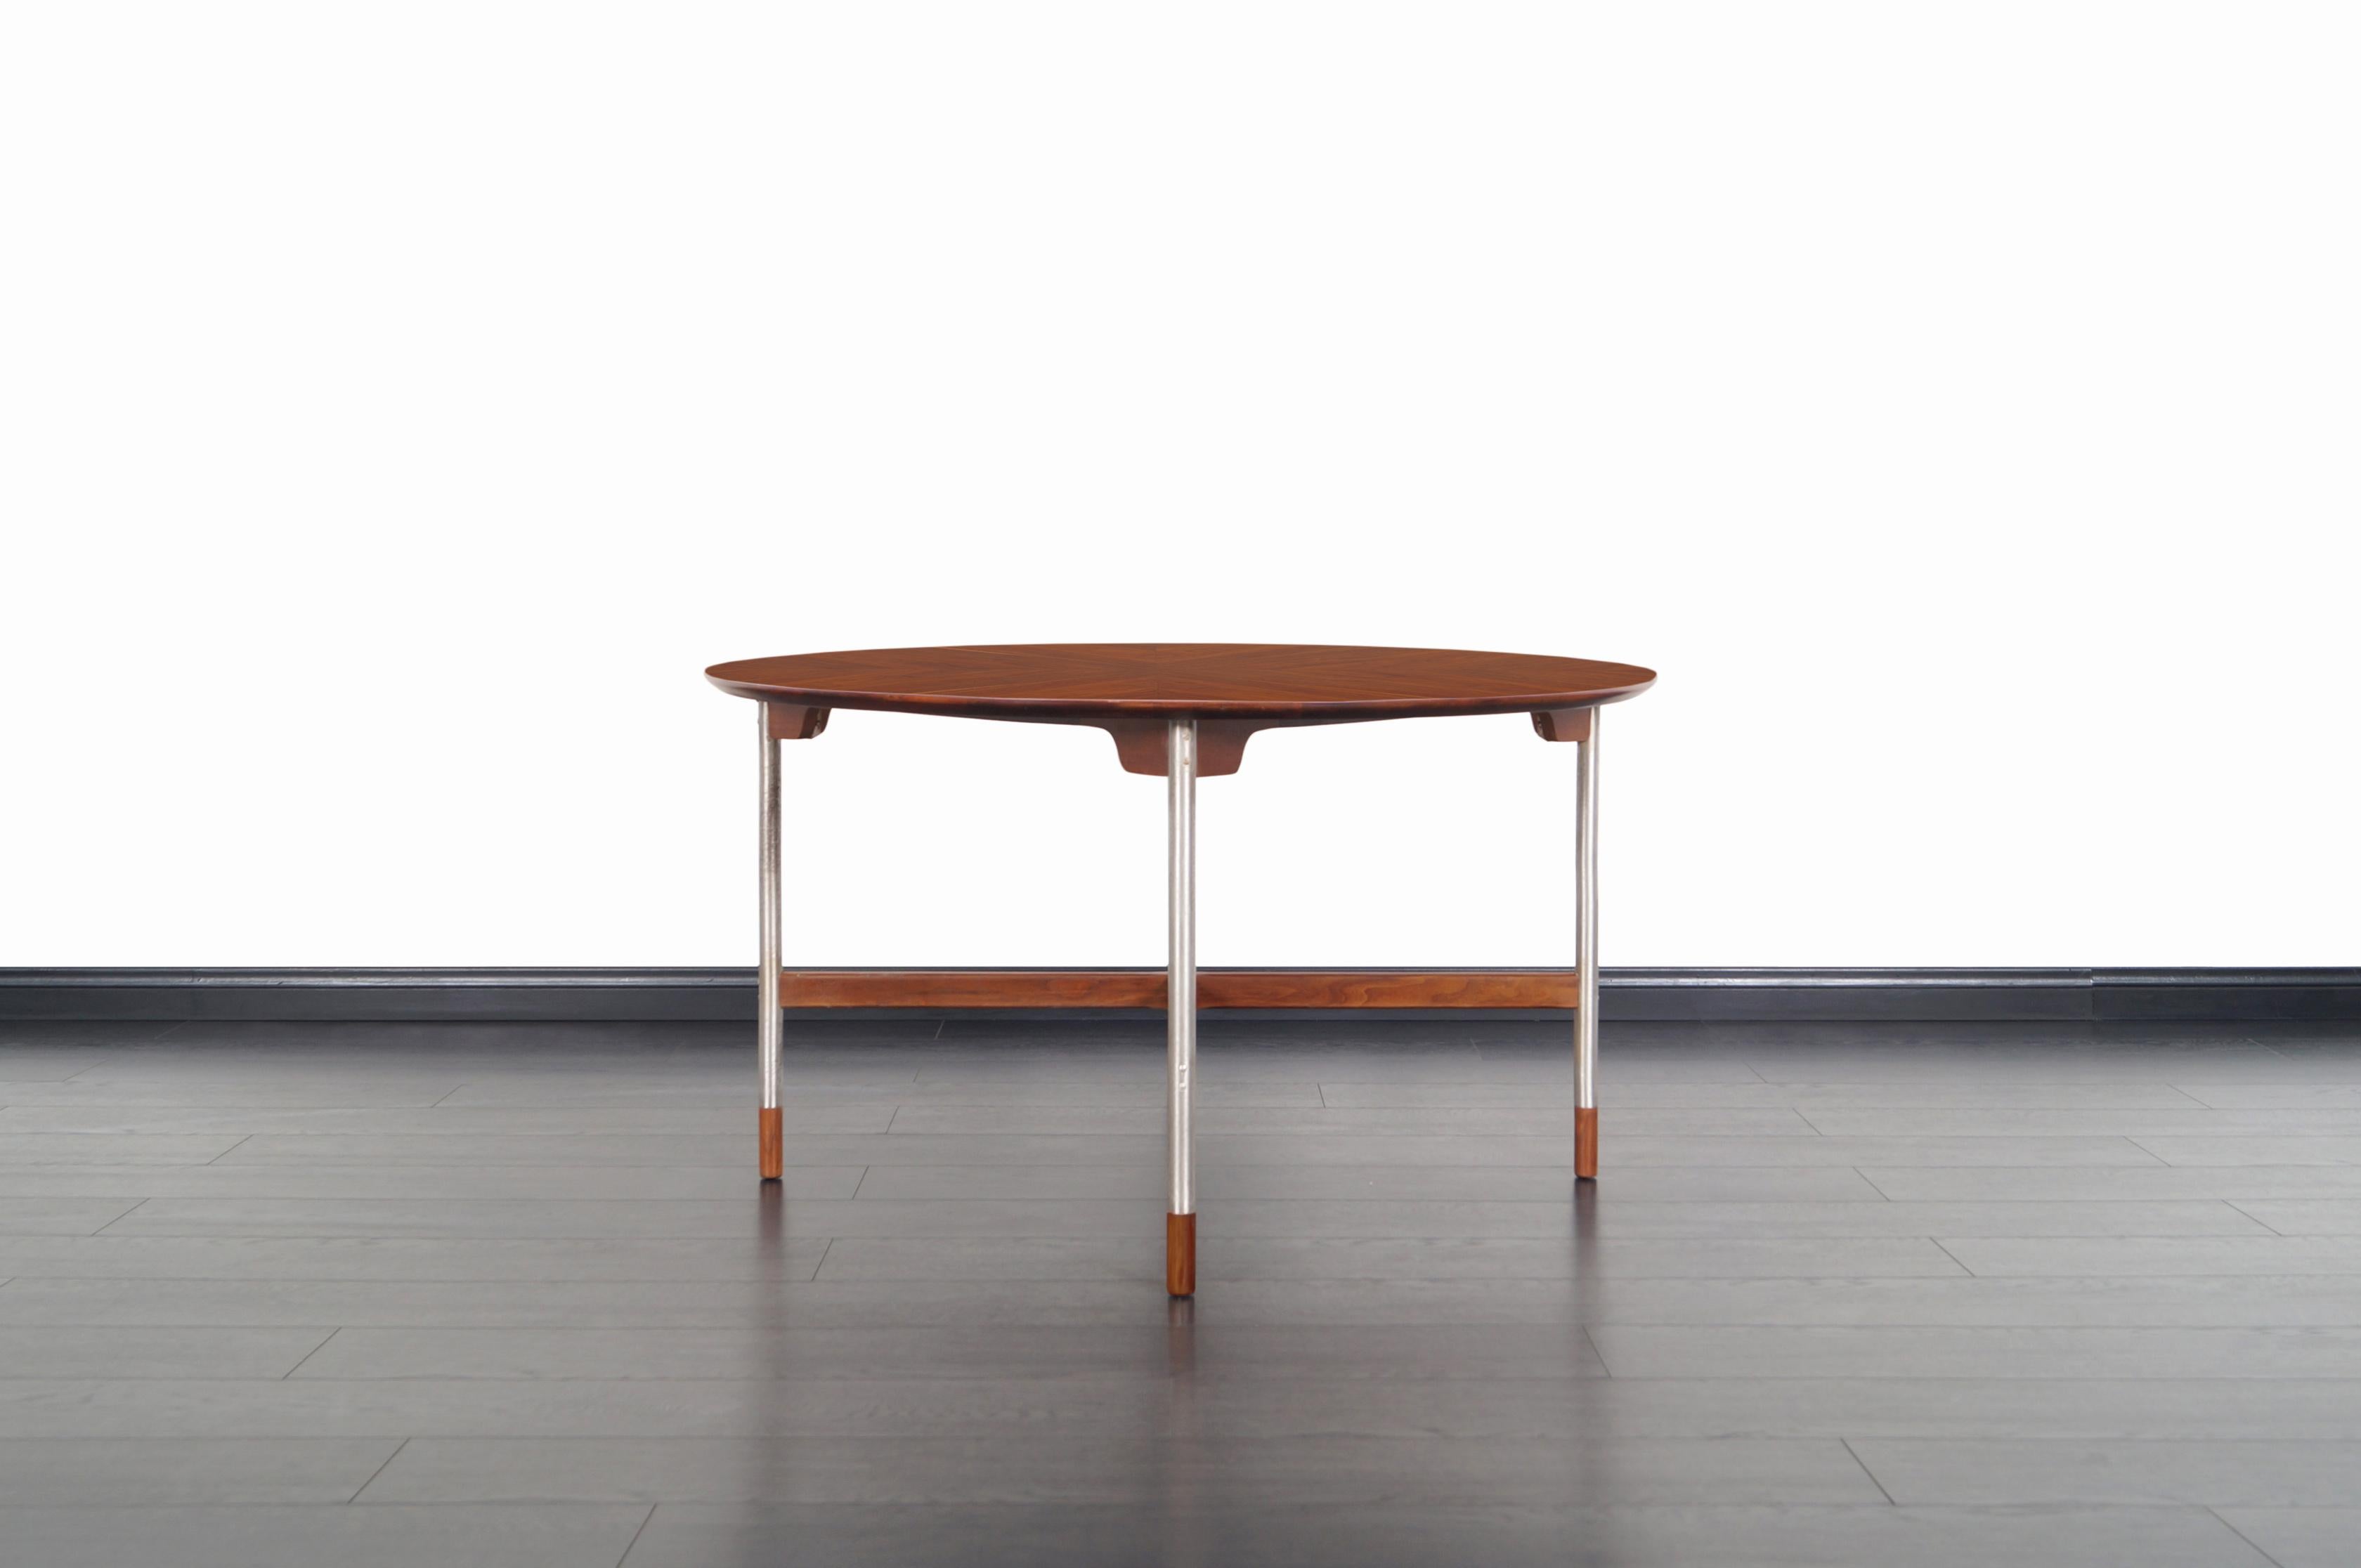 Amazing Mid-Century Modern table by Jack Cartwright for founder in the United States, circa 1960s. Features a book-matched walnut top, X-shaped stretcher, and brushed steel legs with solid walnut caps. The symmetry in the grain of the top is simply